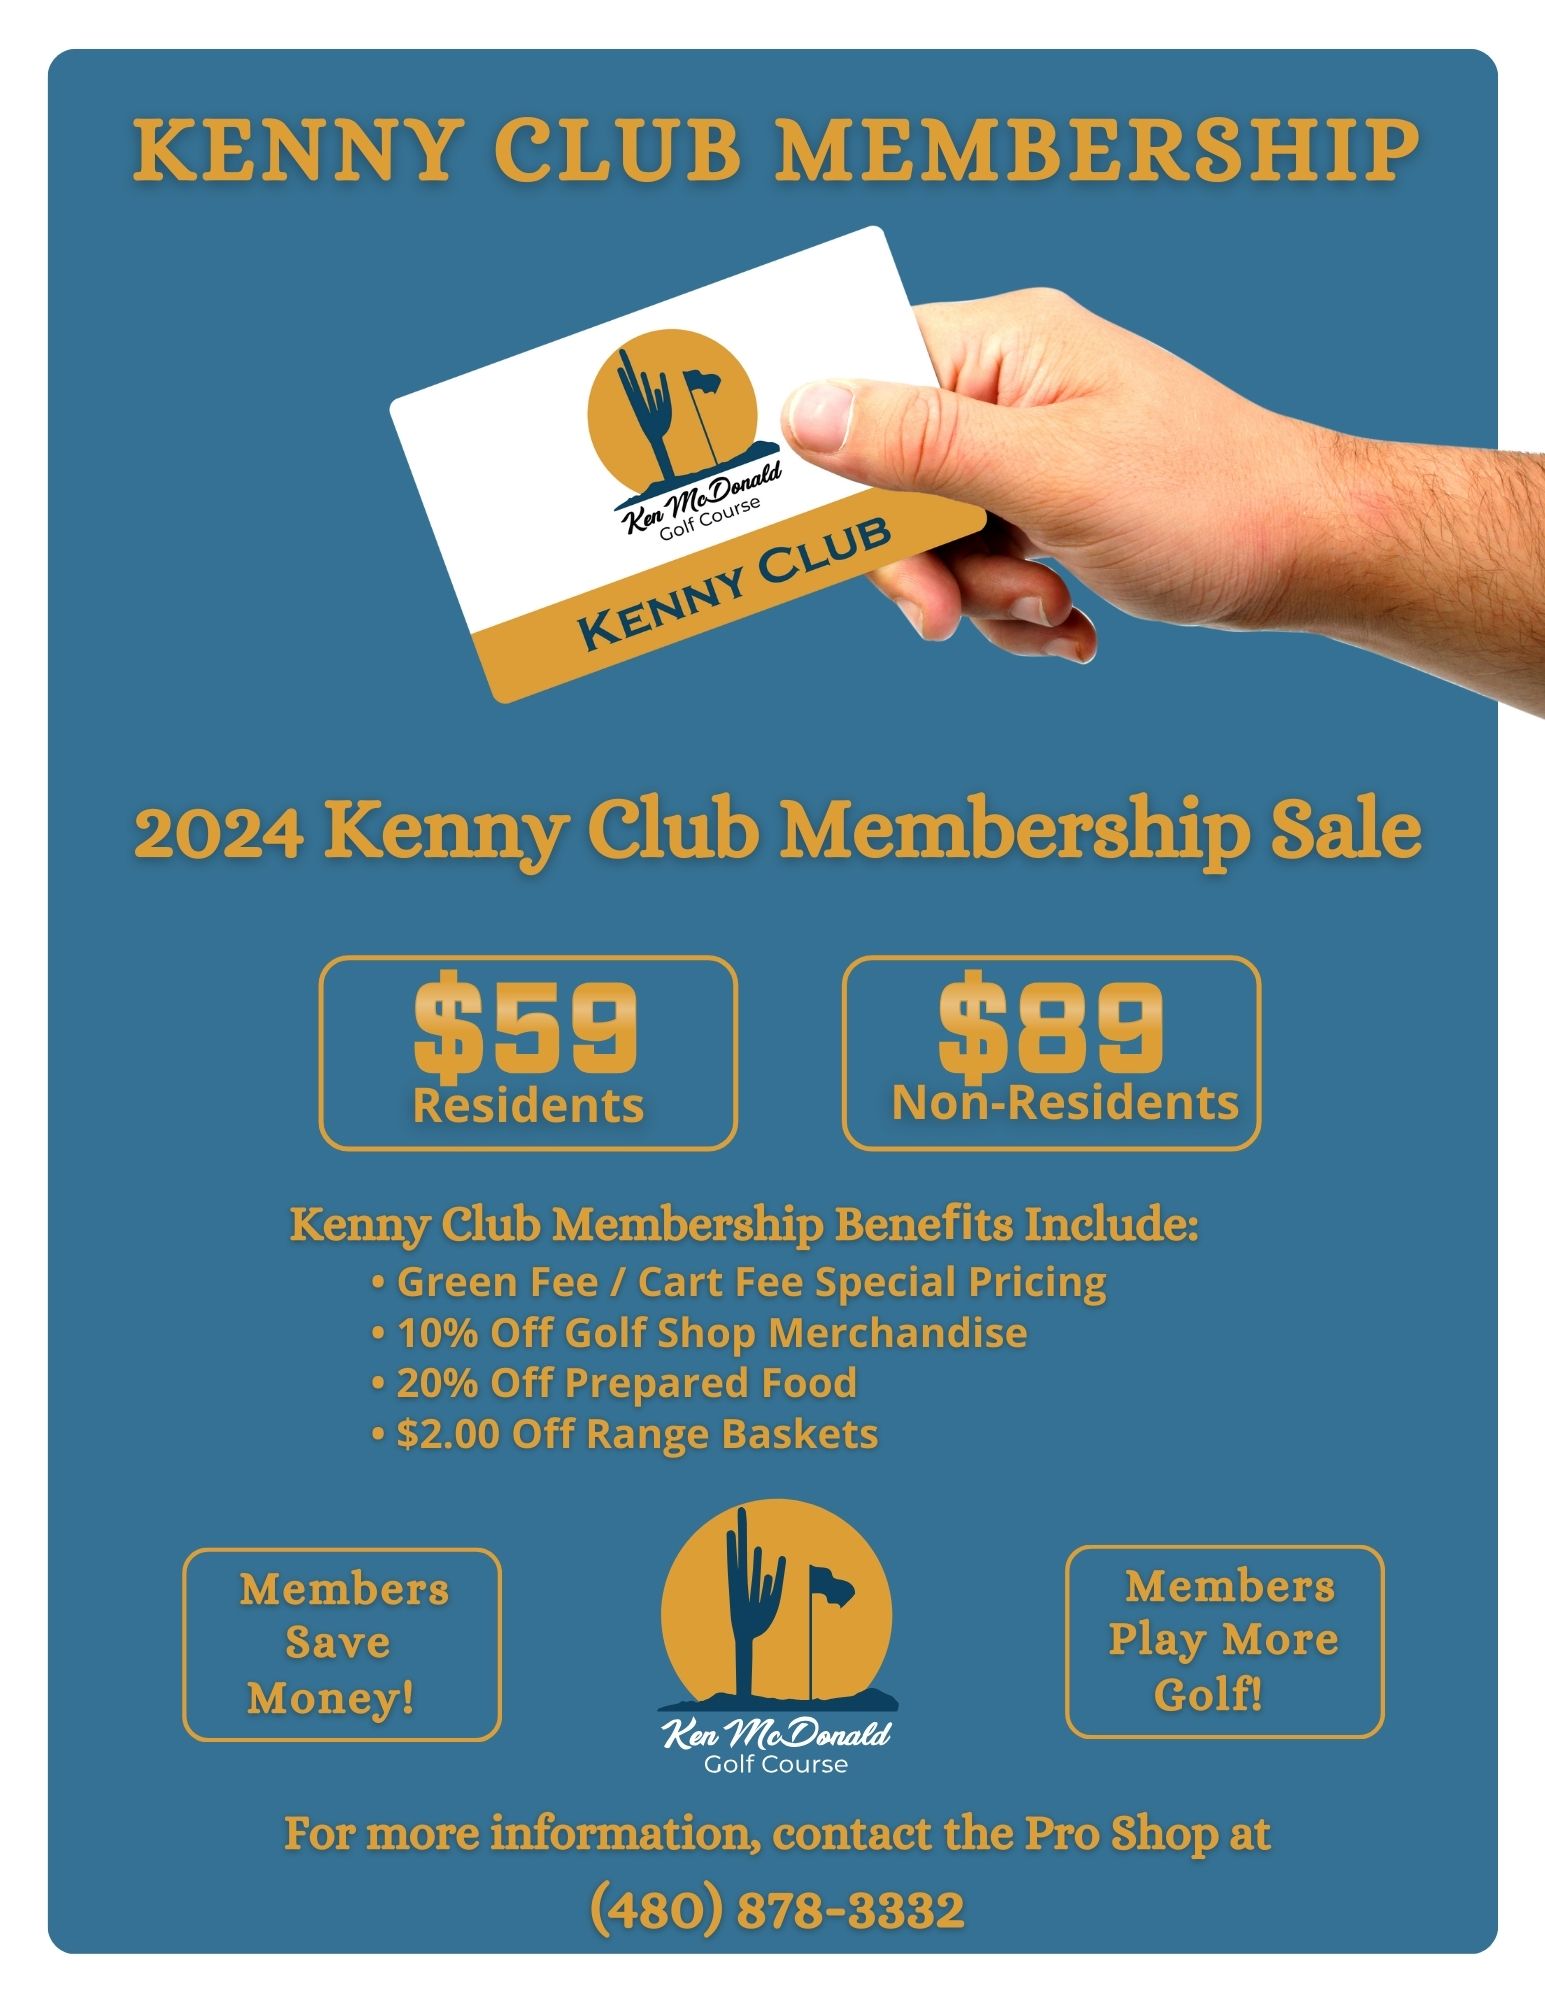 Kenny Club Membership Flyer - Benefits Include: 10% Off Golf Shop Merchandise, 20% Off Prepared Food, $2.00 off Range Baskets - Residents: $59, Non-Residents: $89